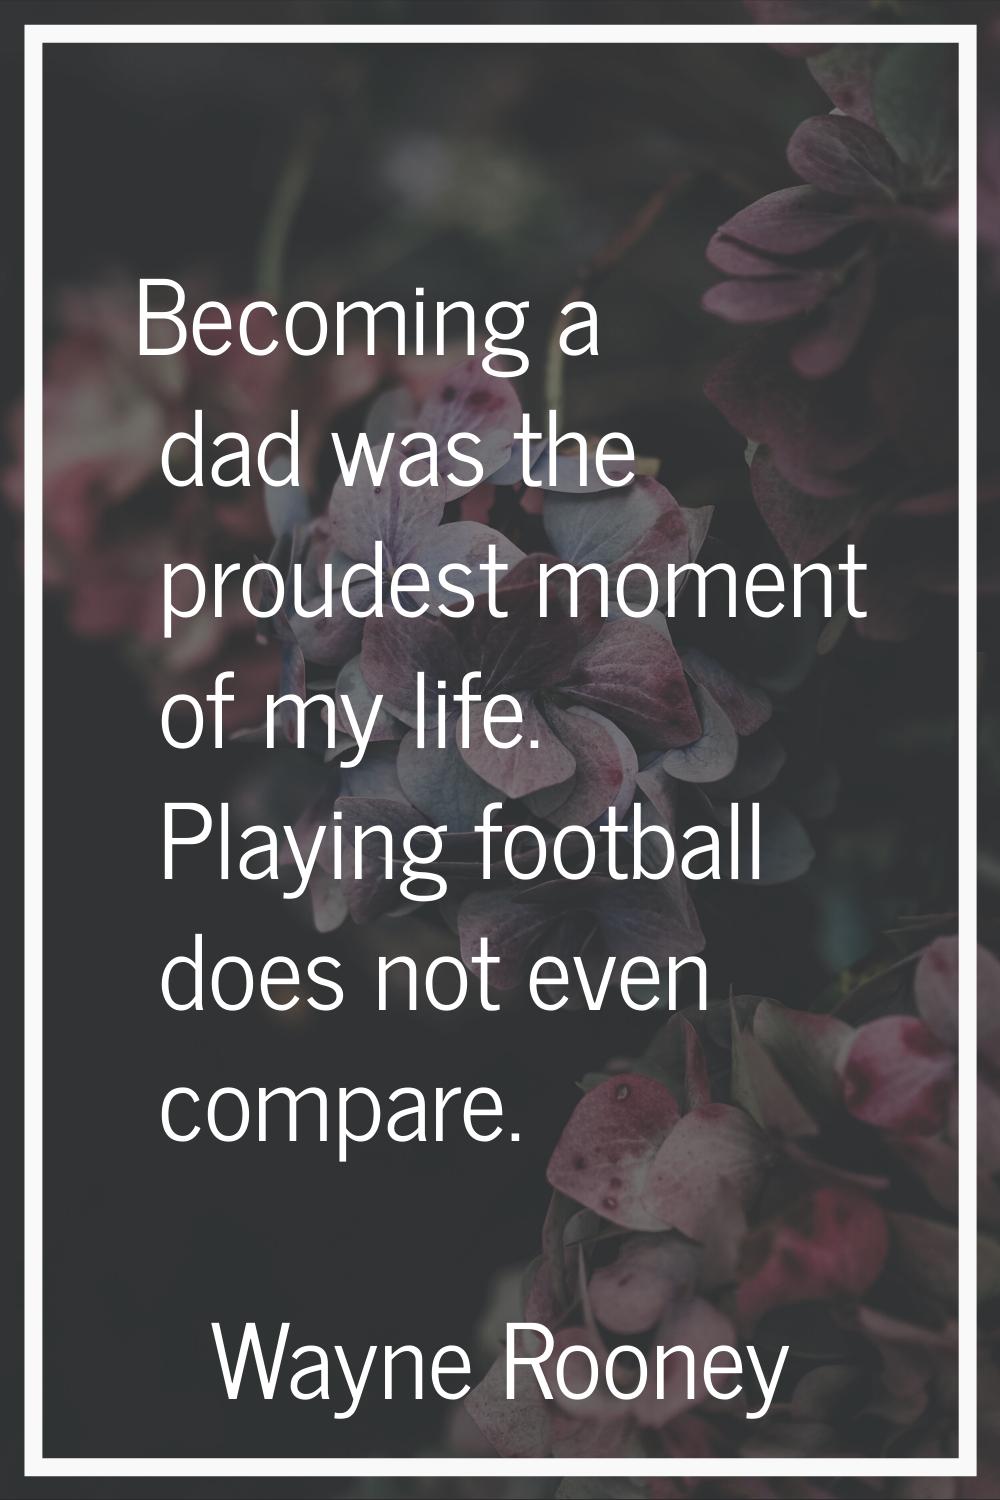 Becoming a dad was the proudest moment of my life. Playing football does not even compare.